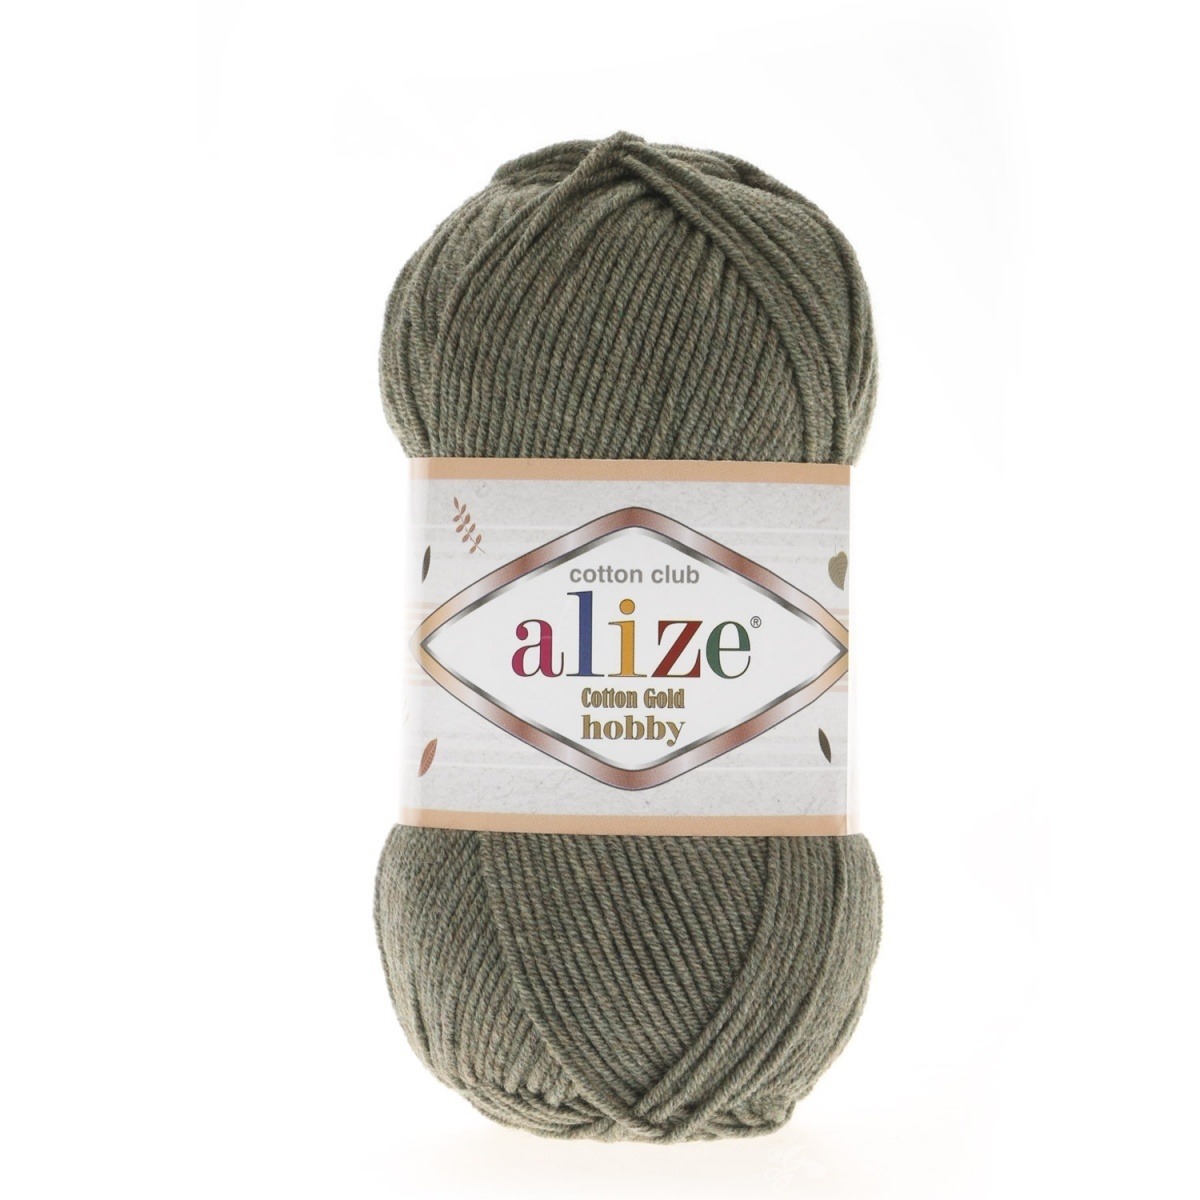 Alize "Cotton gold hobby" (270)